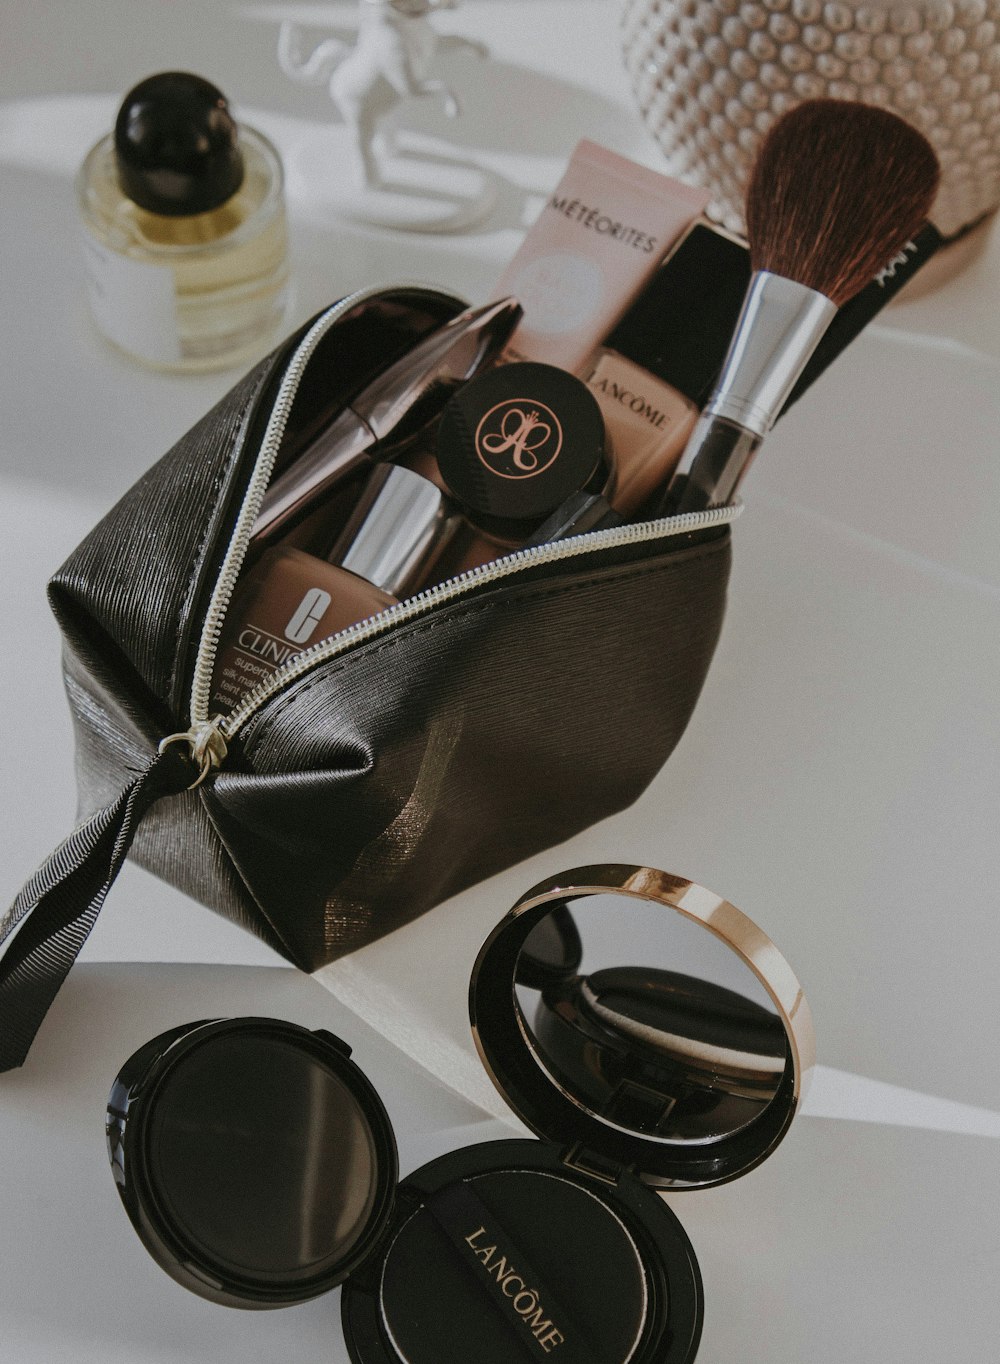 black leather bag with makeup brushes and makeup brushes